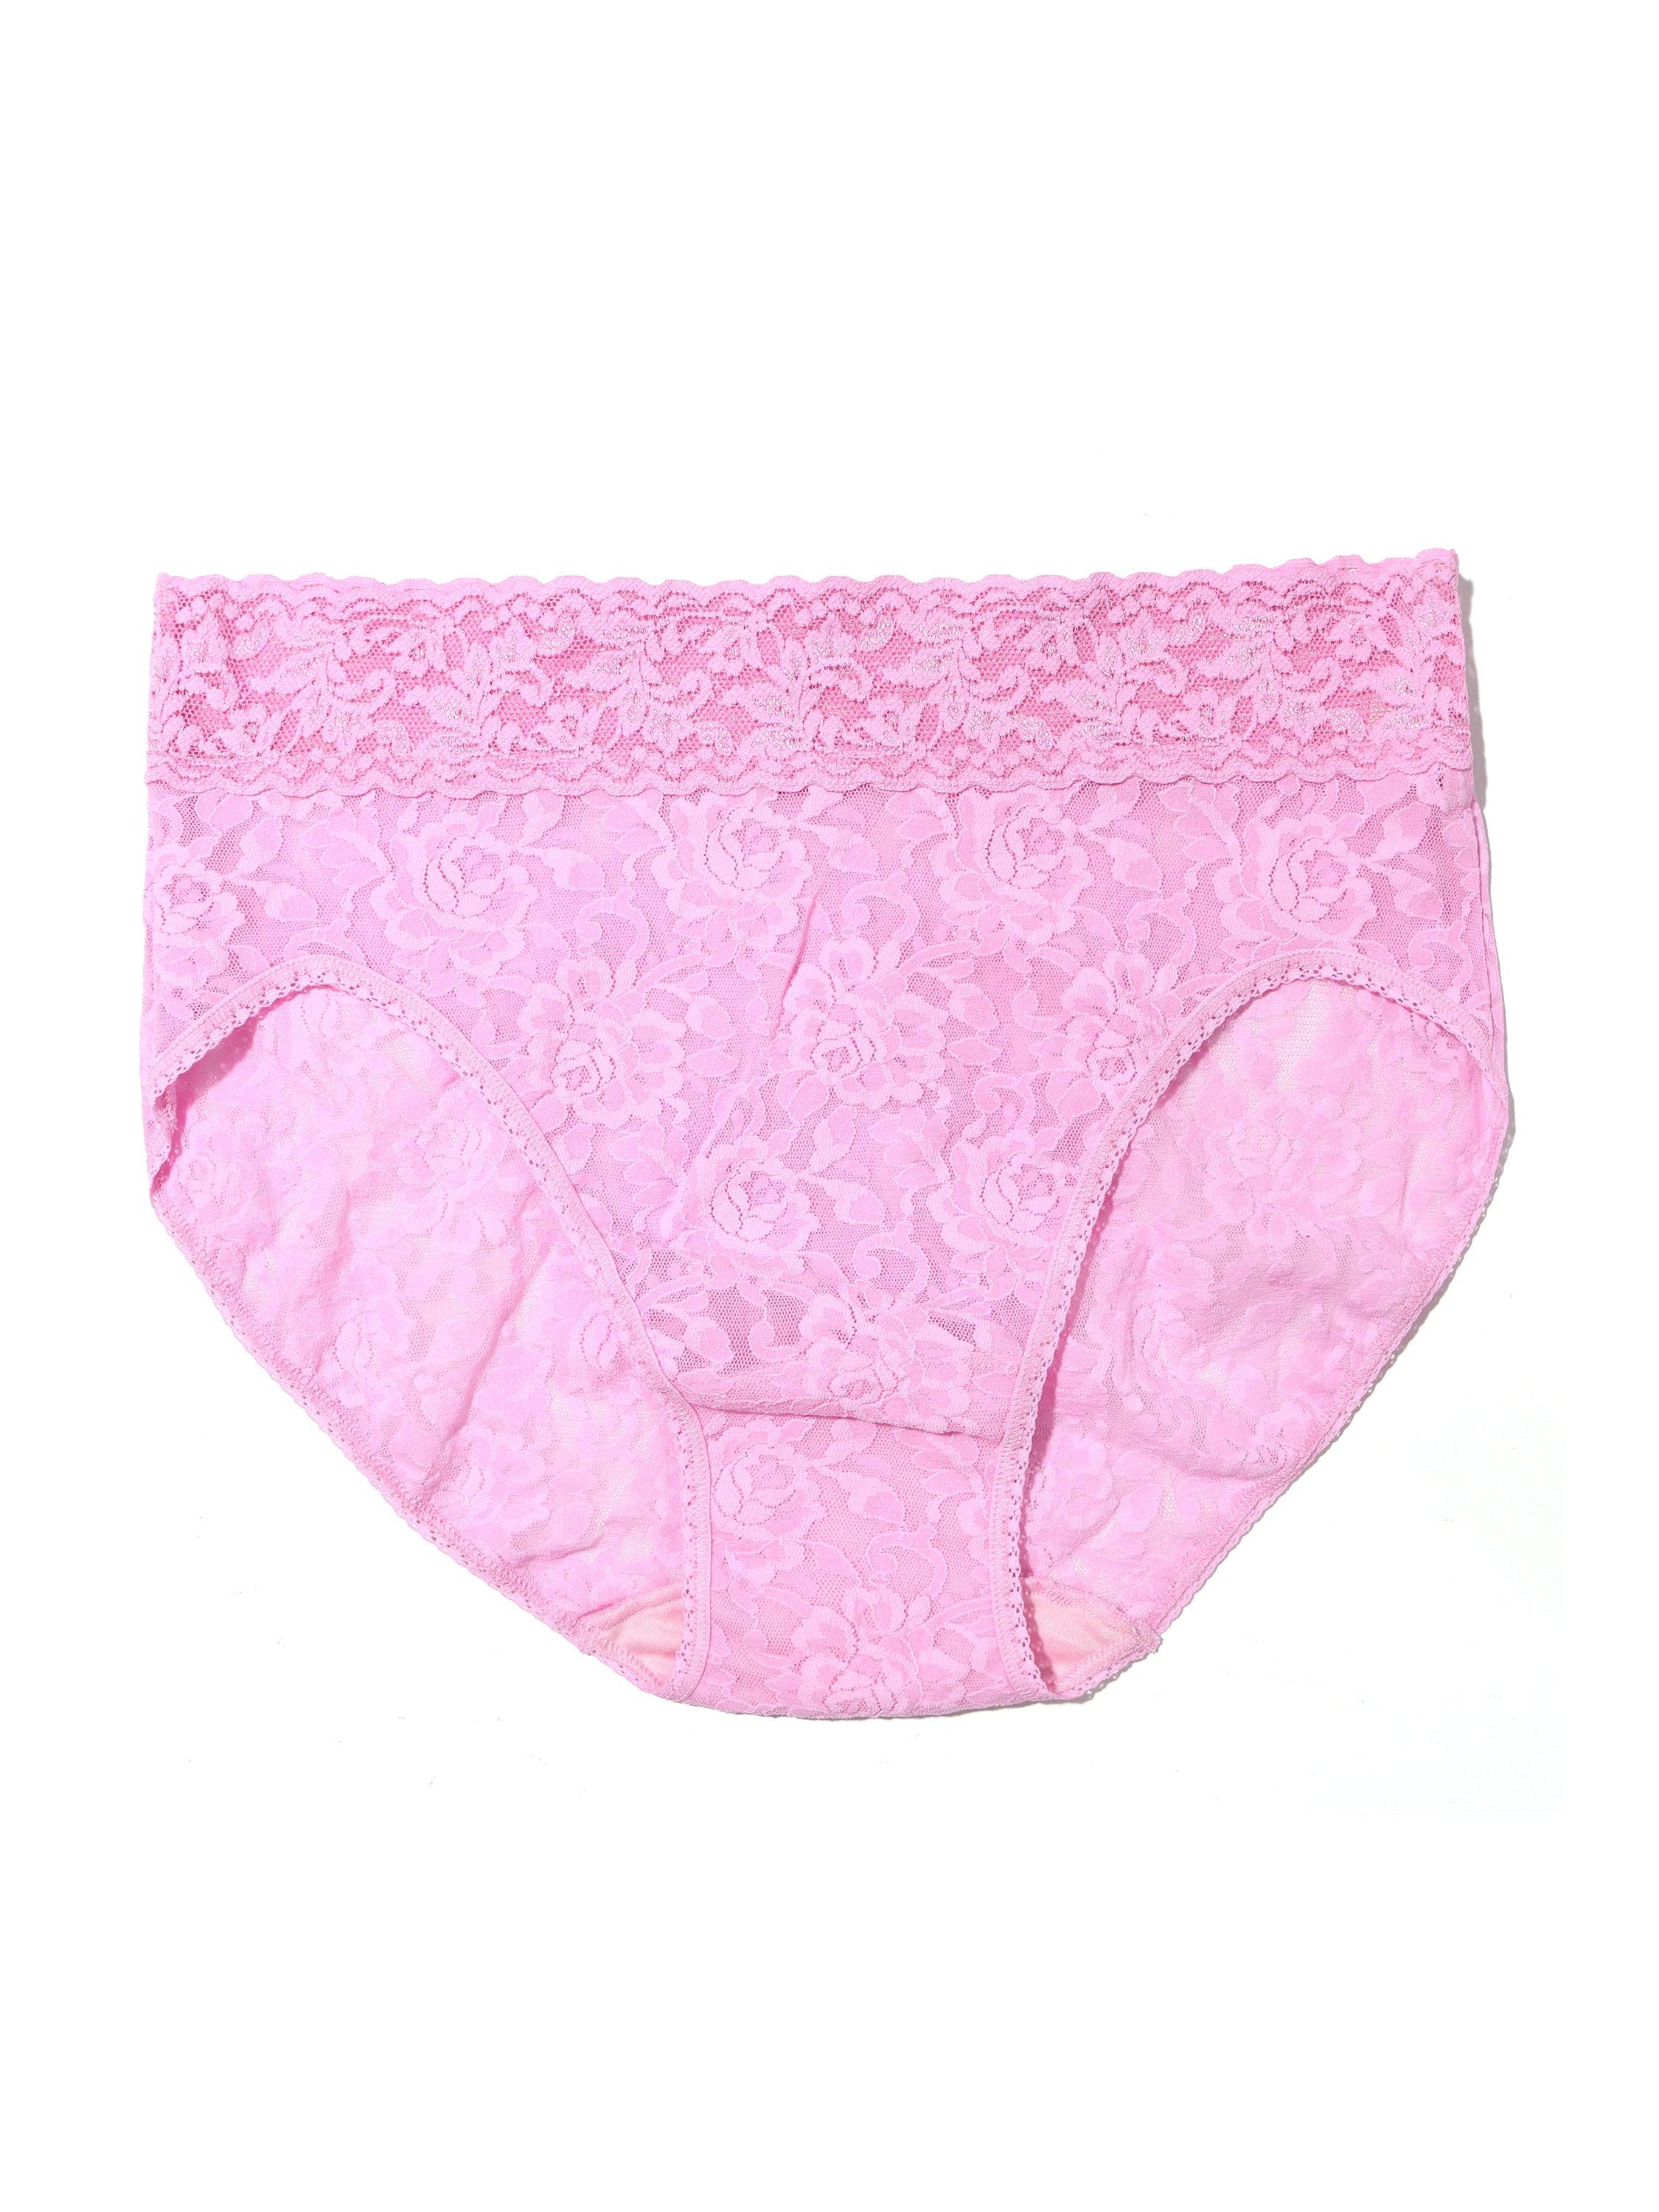 Candy Colors Lace Hipster Panty for Ladies - China Briefs and